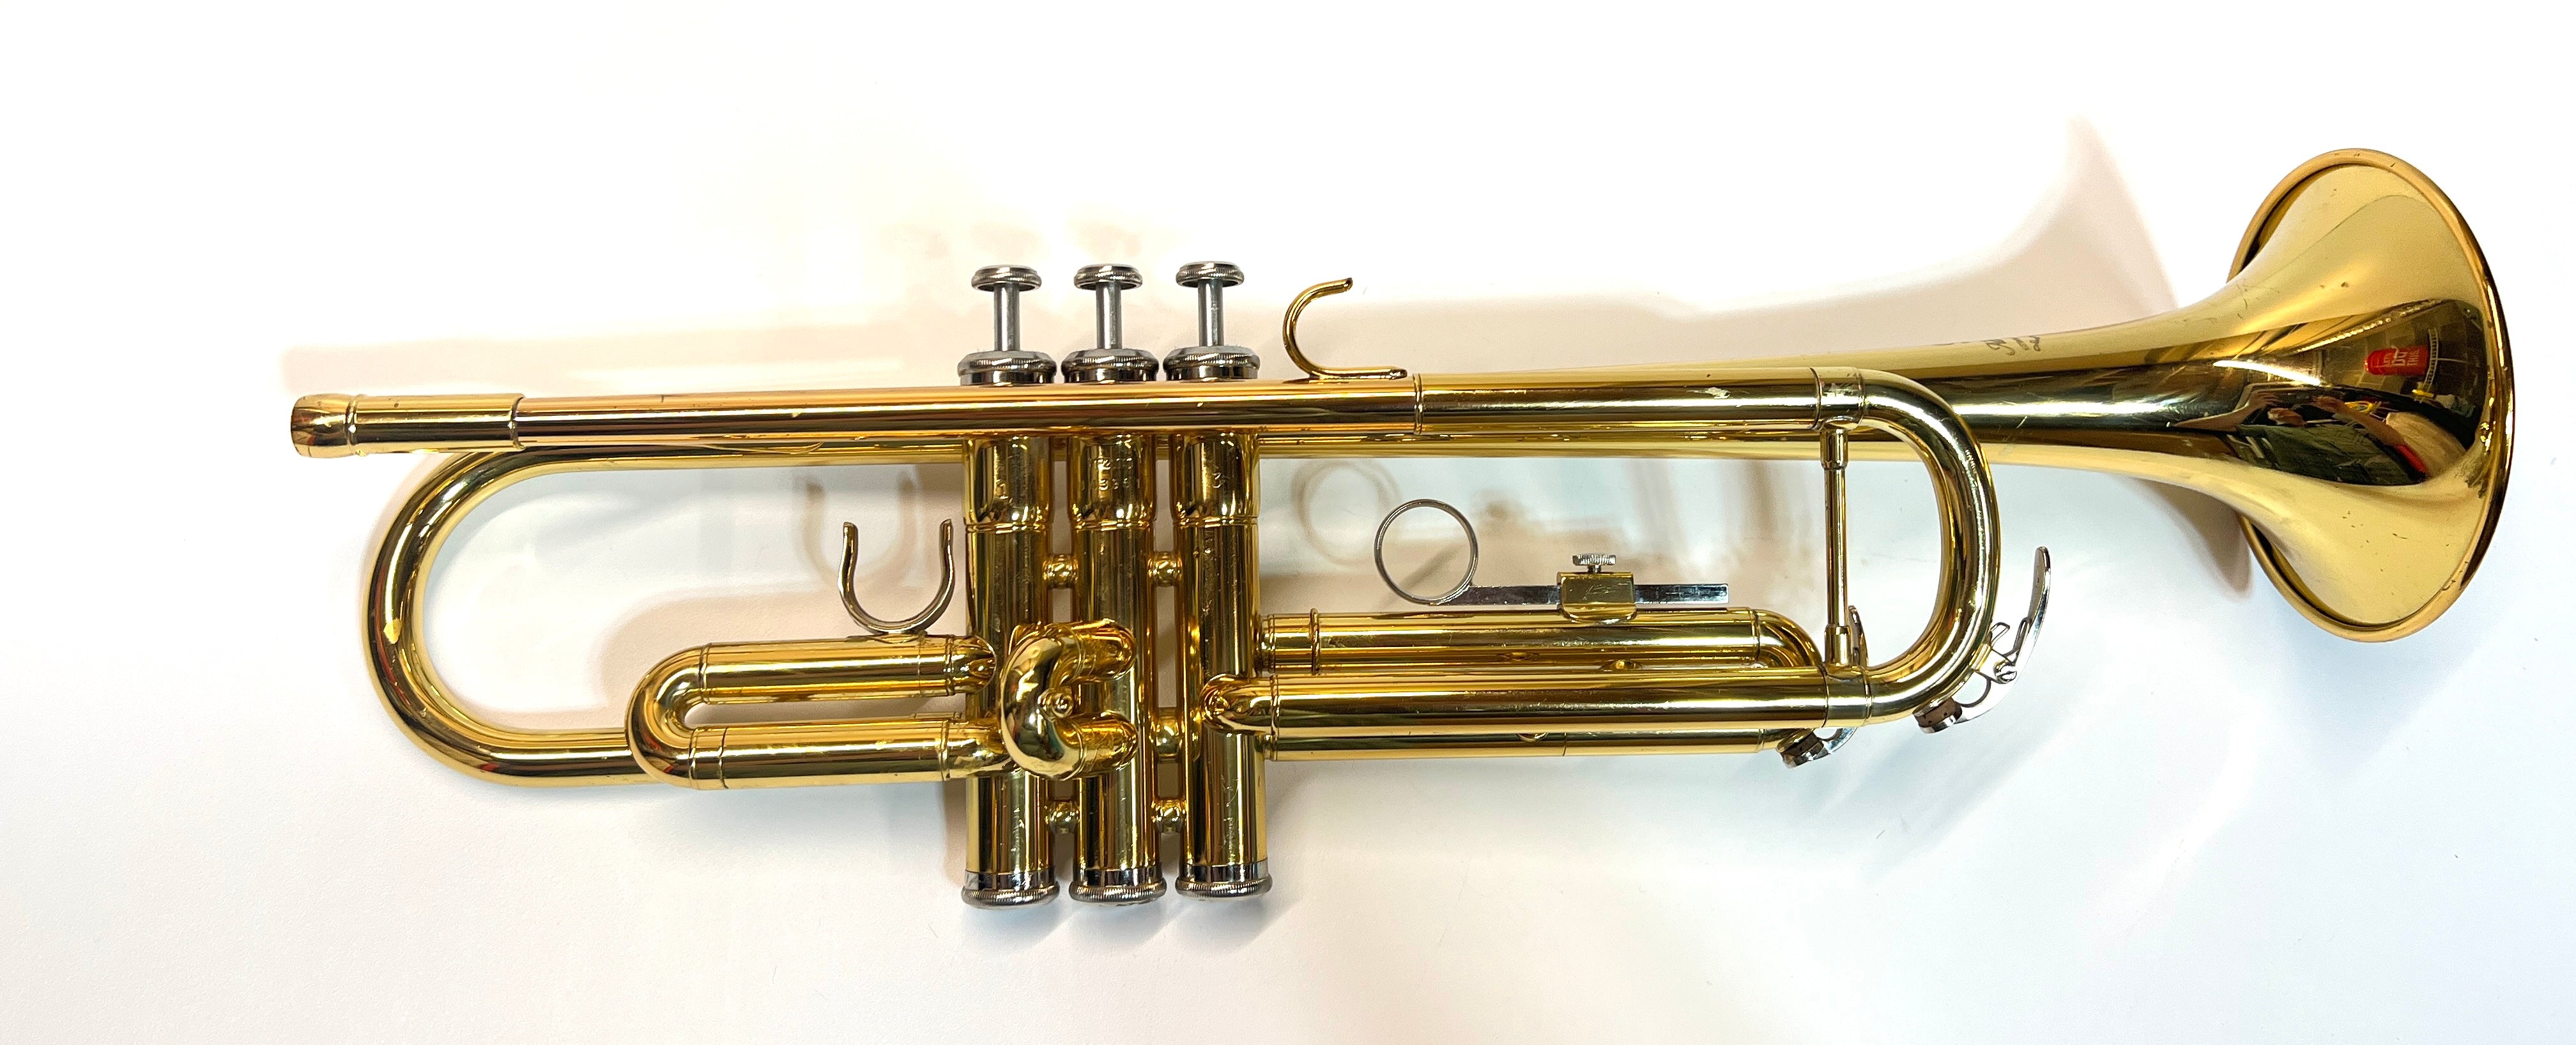 Yamaha Trumpet Advantage 200-AD Minor Dings Recently Serviced Plays Well USED